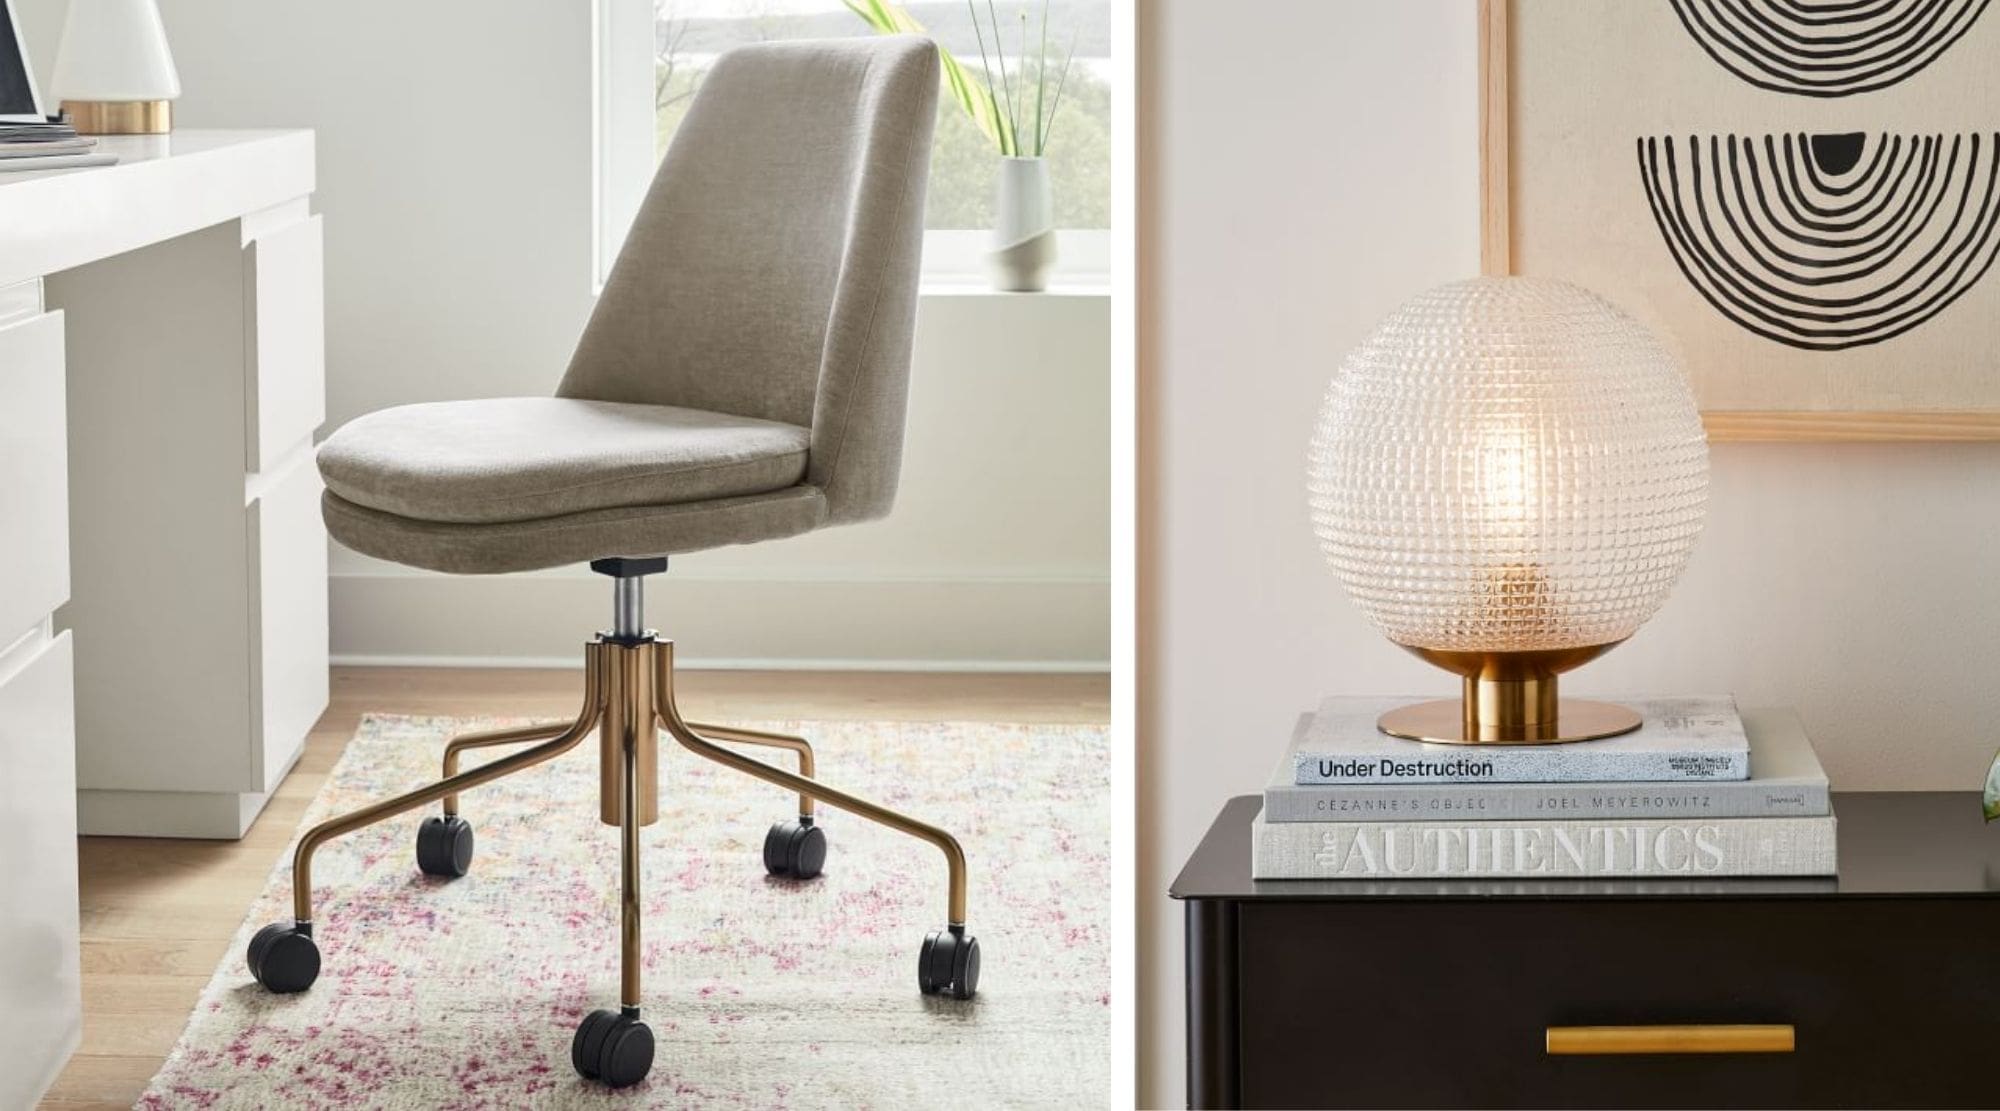 Perfect additions to accessorize the West Elm Mini Desk